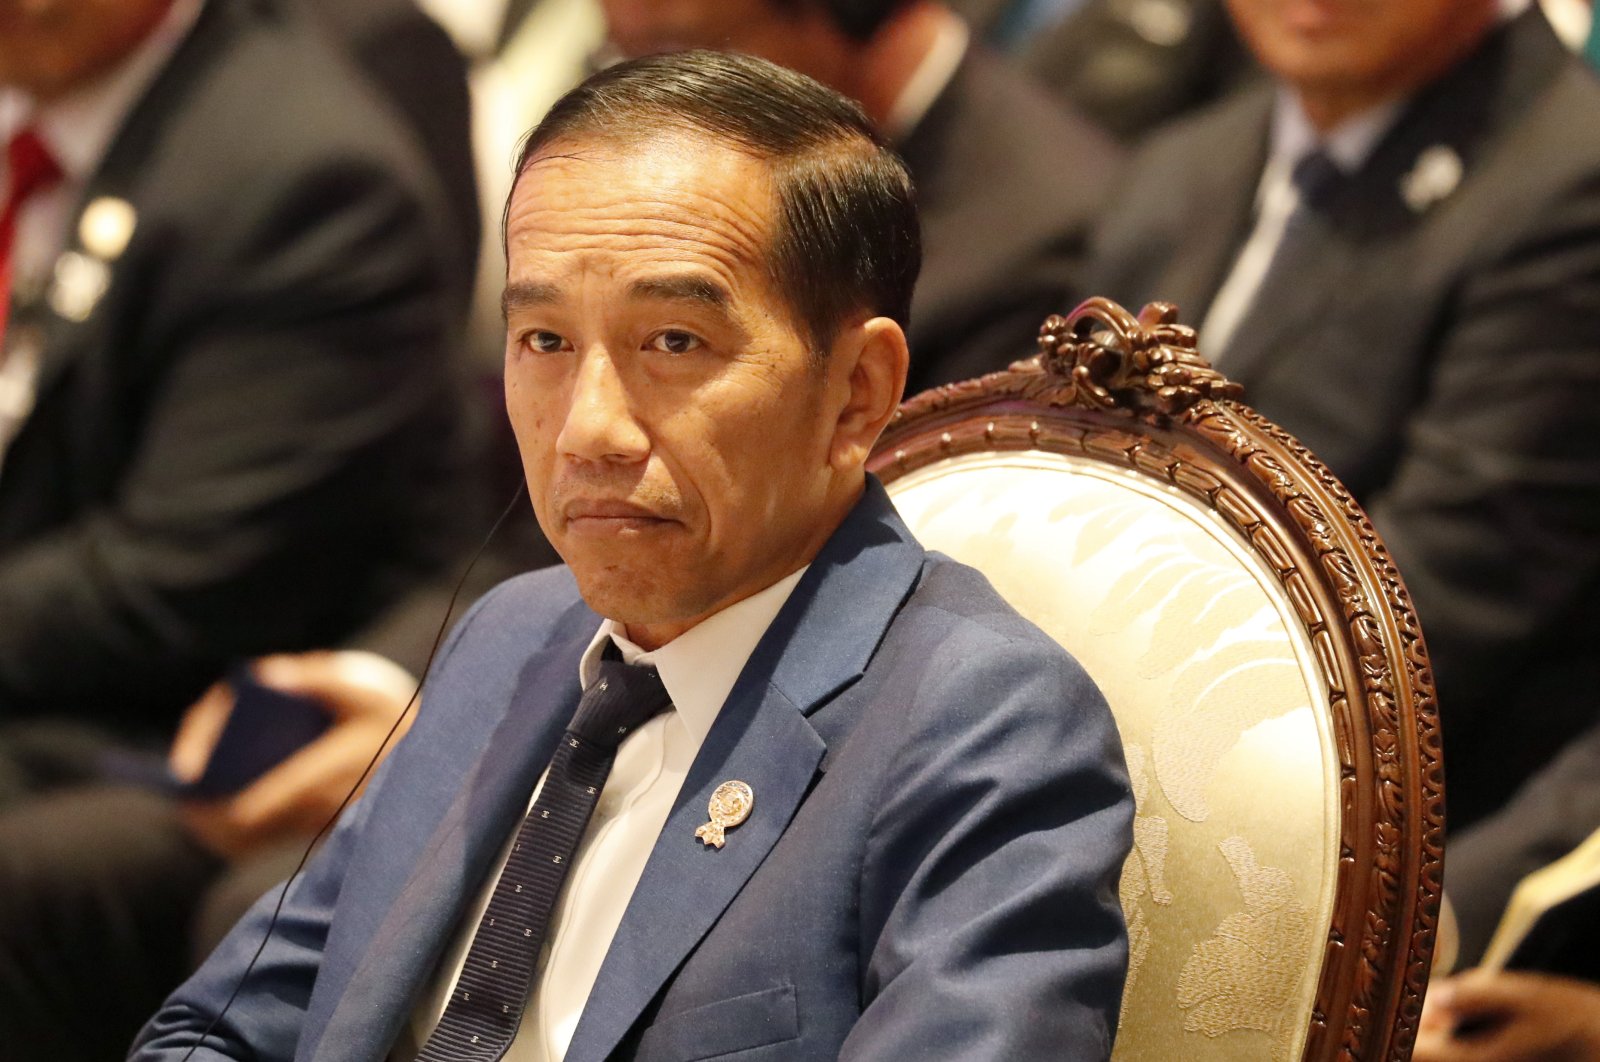 Indonesia's President Joko Widodo attends the 22nd ASEAN-Japan Summit during the 35th Association of Southeast Asian Nations (ASEAN) Summit at IMPACT Muang Thong Thani, a northern suburb of Bangkok in Nonthaburi province, Thailand, Nov. 4, 2019. (EPA Photo)